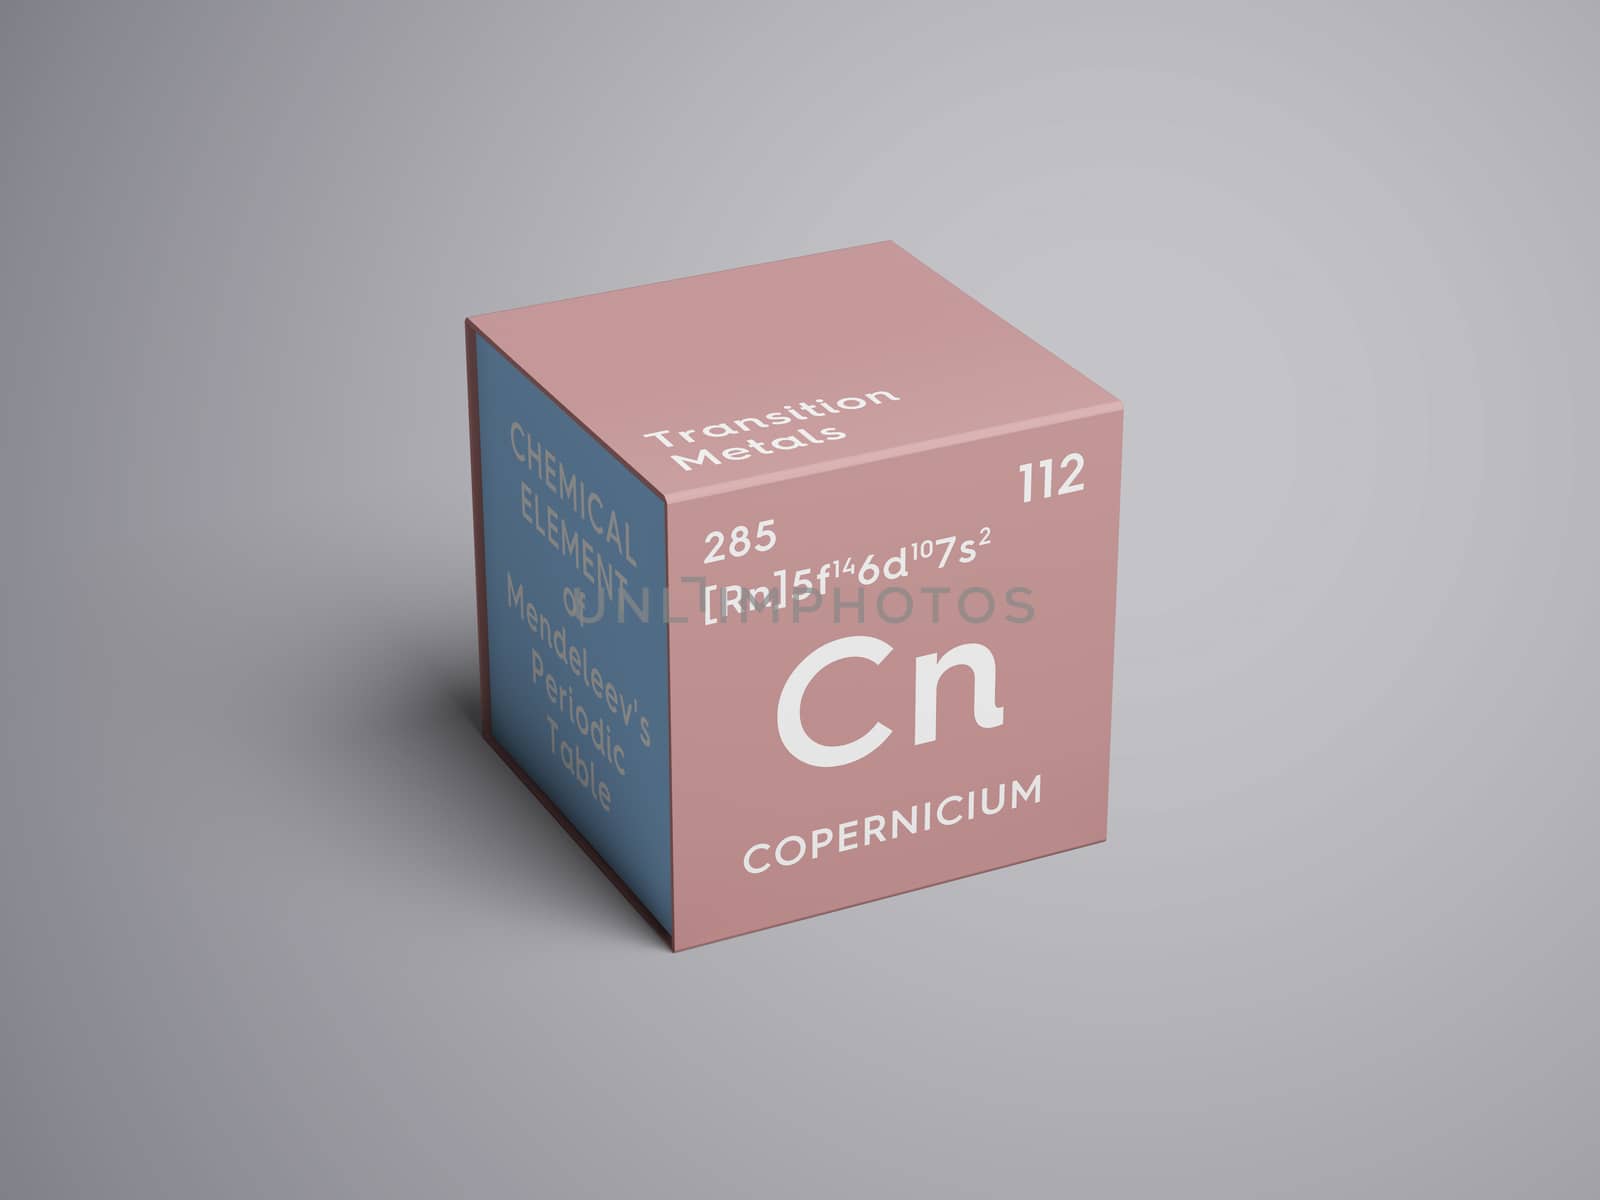 Copernicium. Transition metals. Chemical Element of Mendeleev's  by sanches812